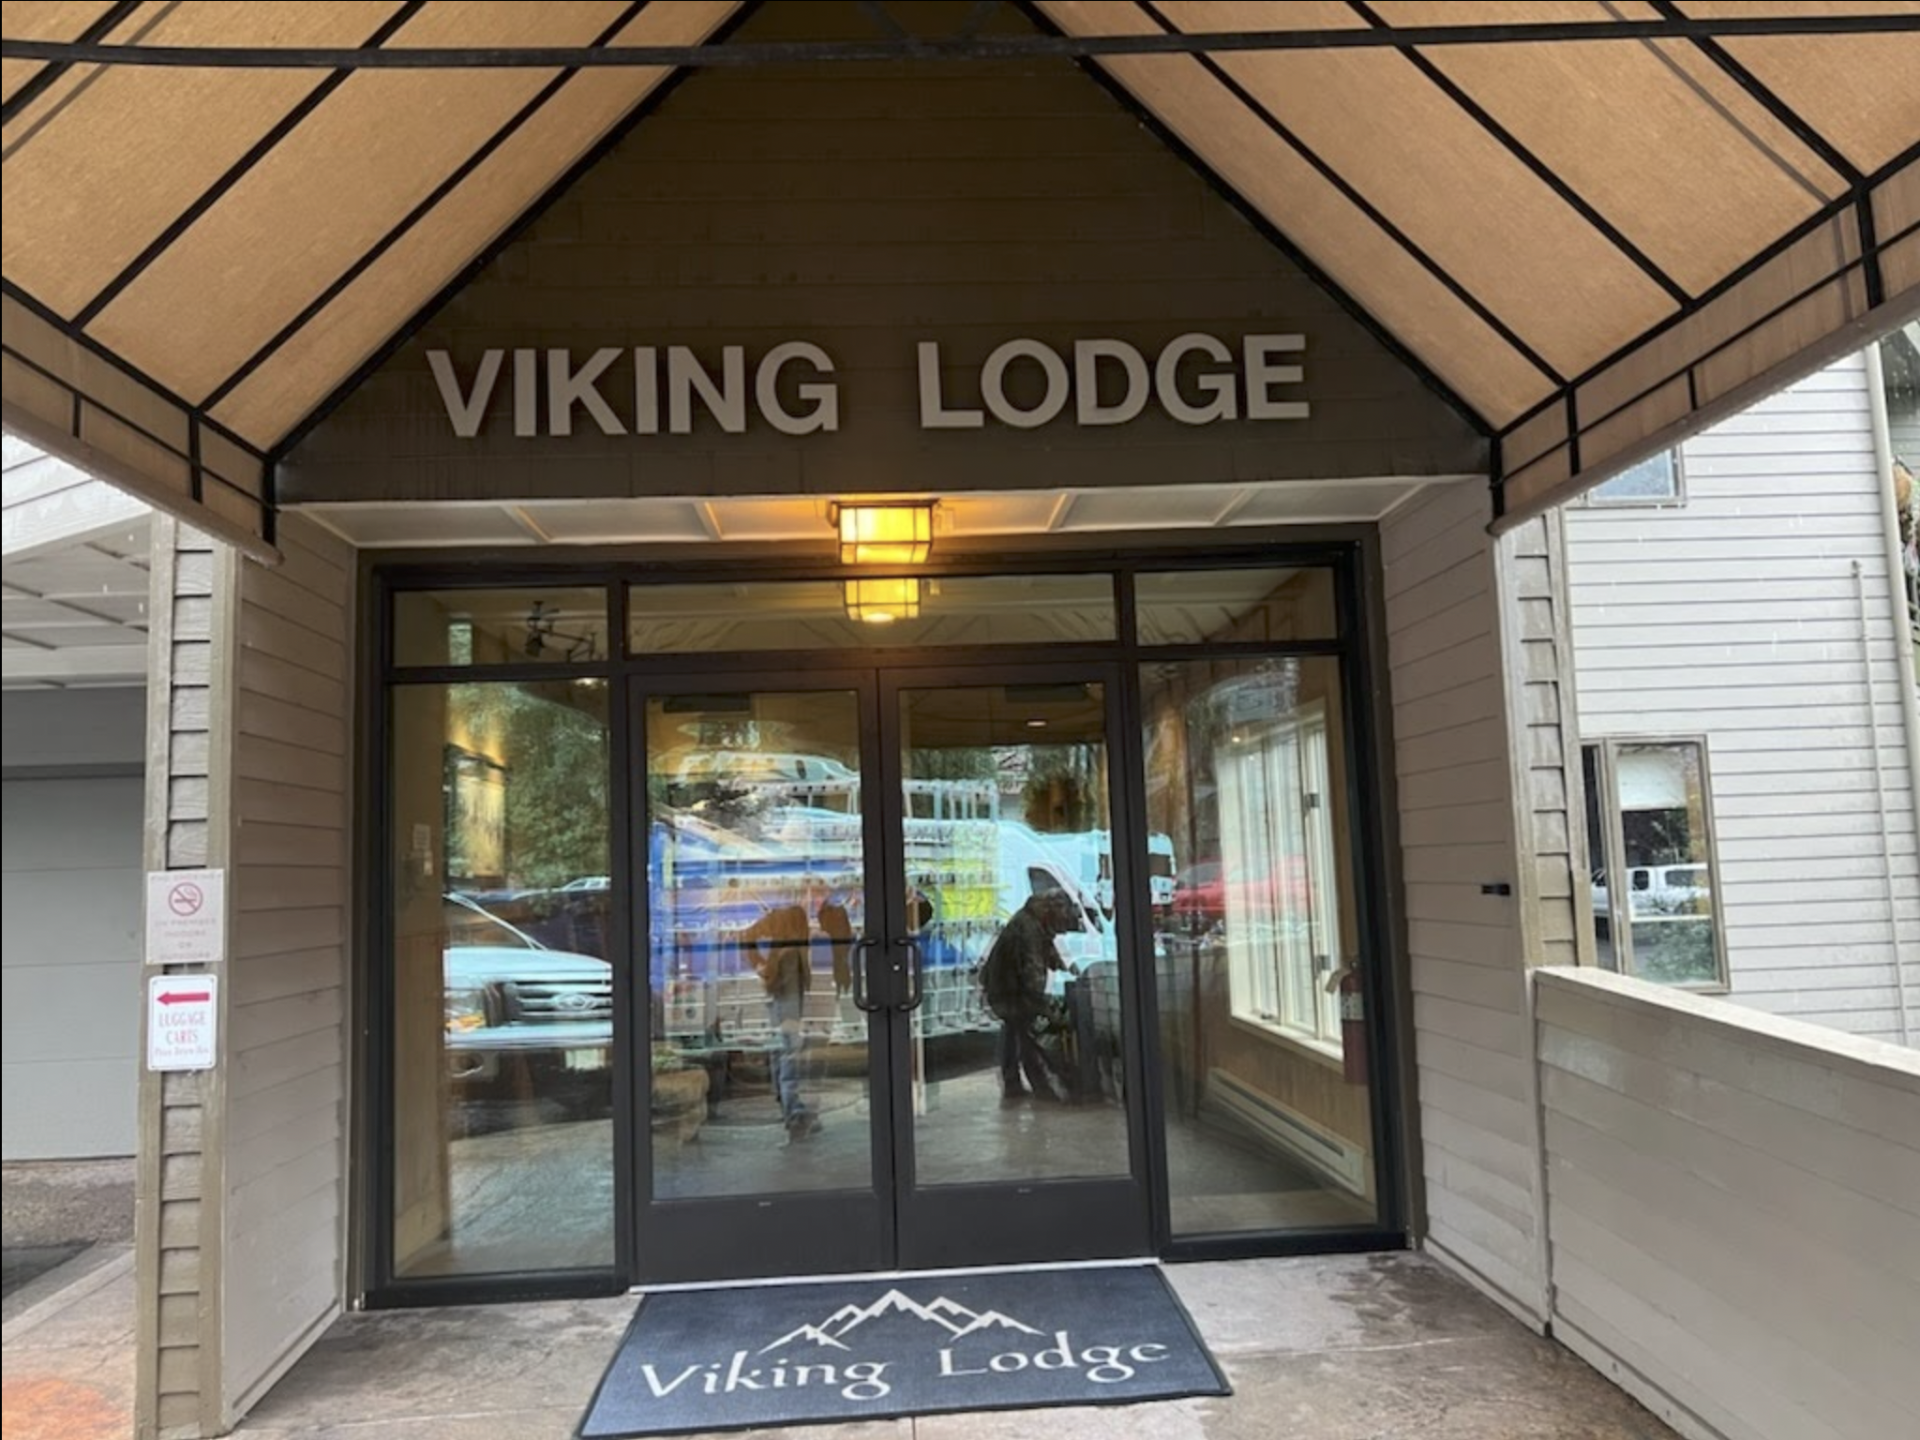 the entrance to the viking lodge is shown with windows and doors installed by Sun Glass